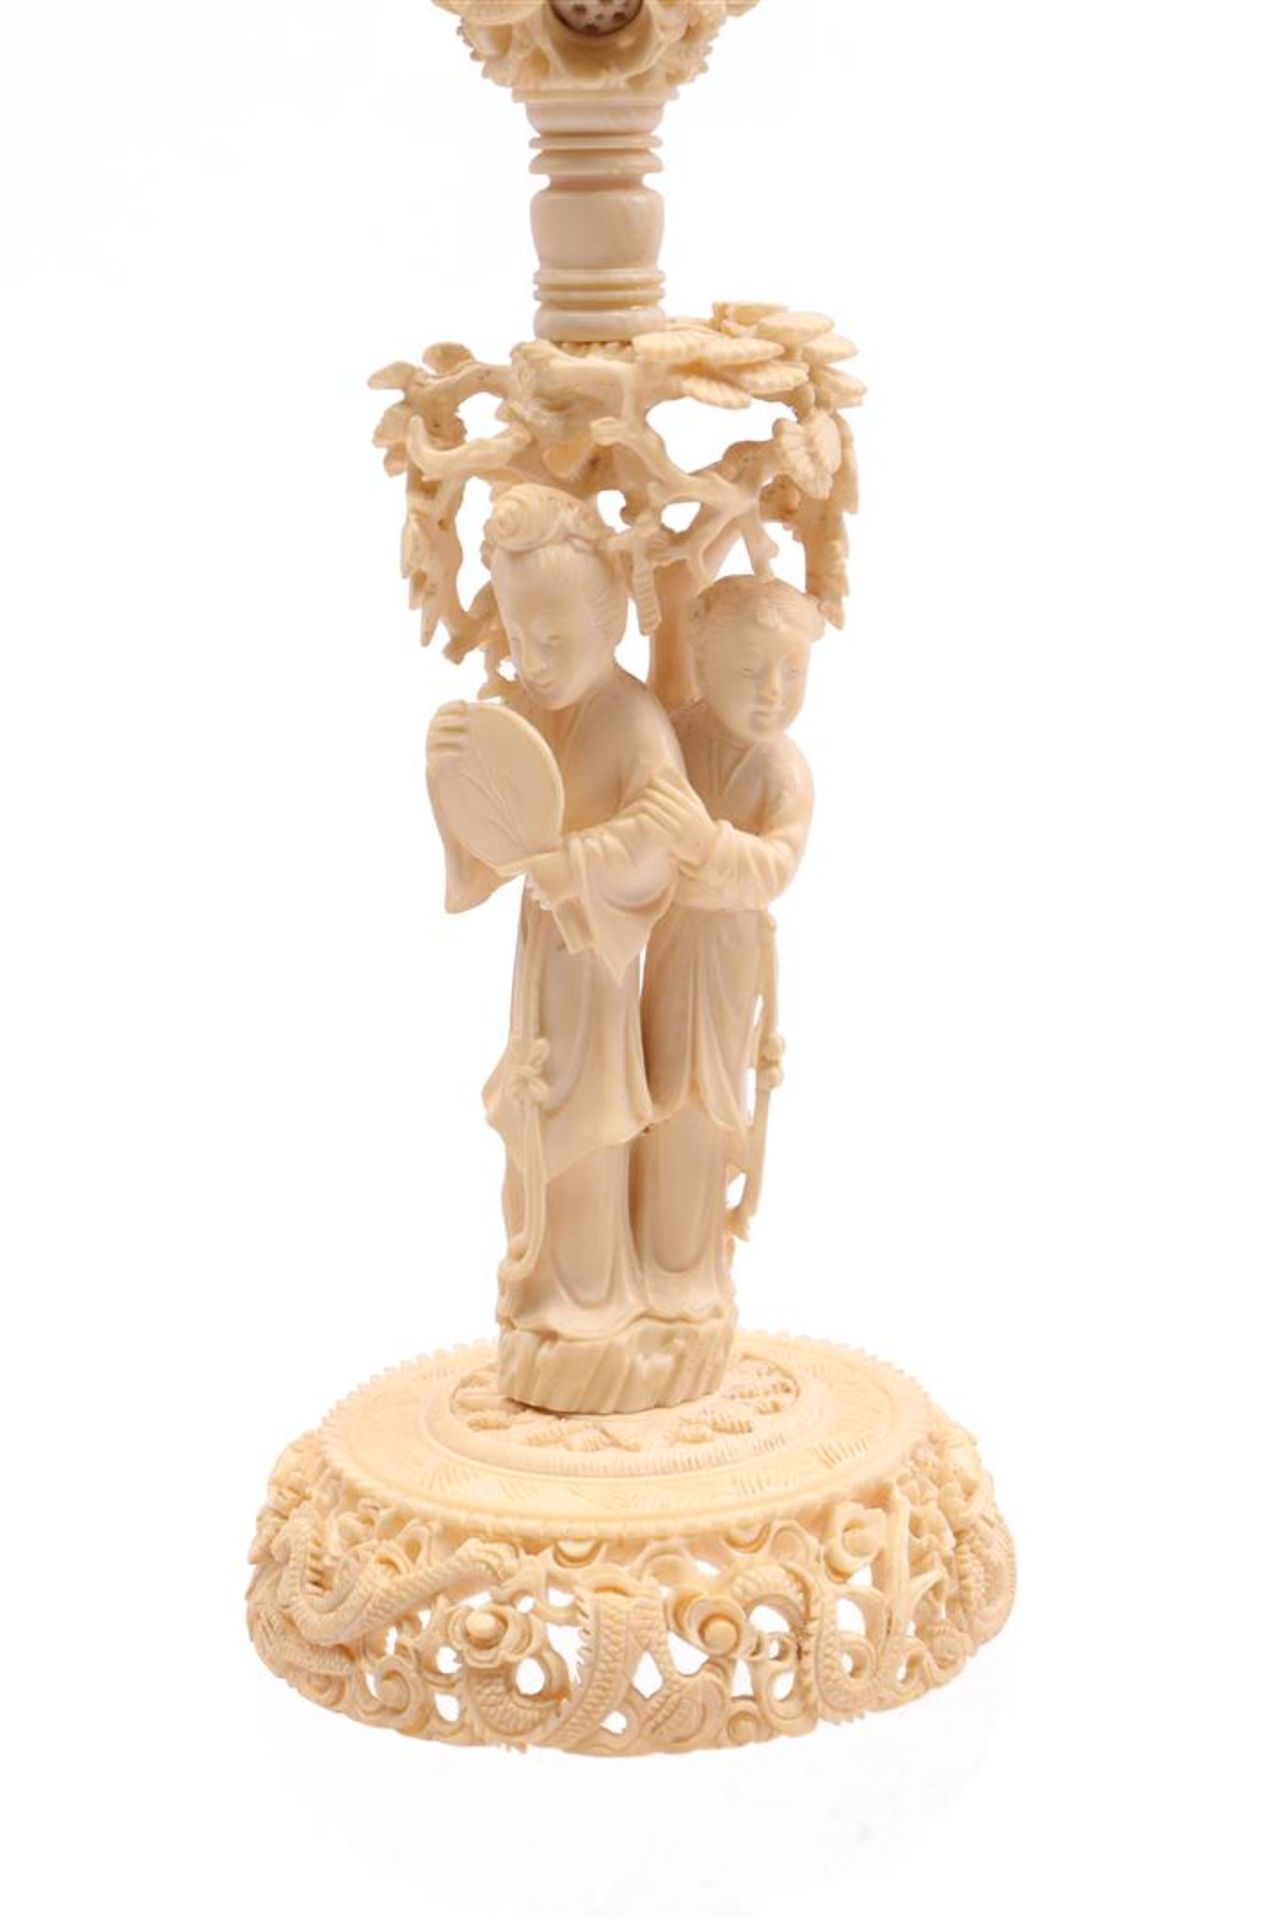 Richly carved ivory ball - Image 2 of 9